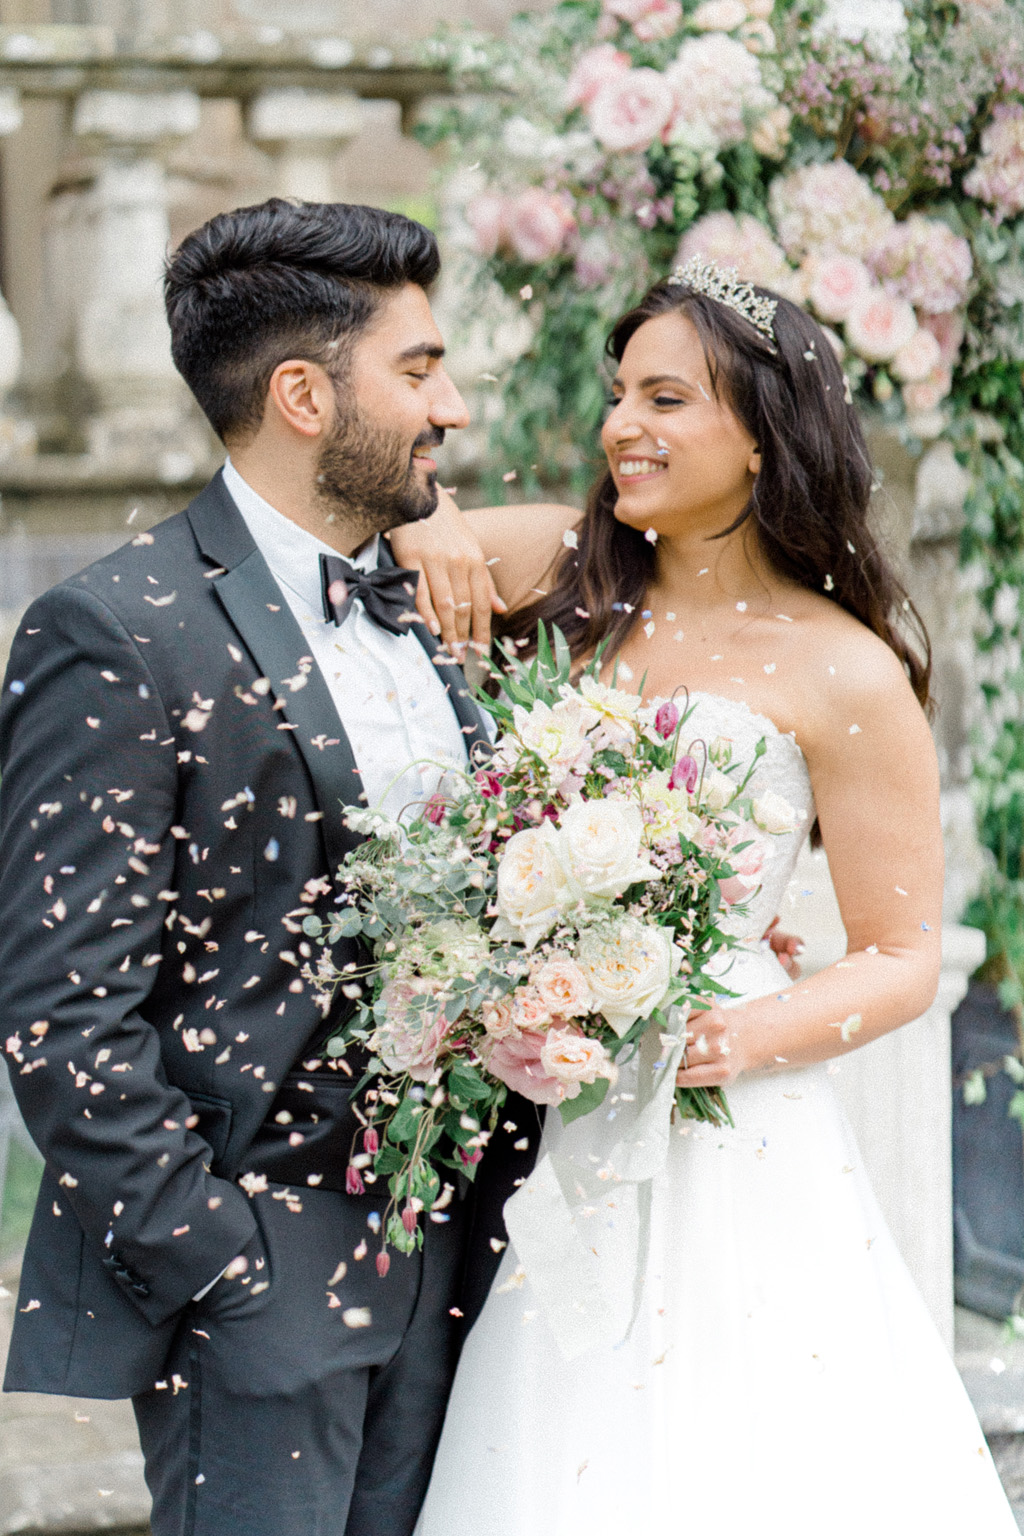 Clearwell Castle wedding blog bride and groom with table styling and extravagant styled florals